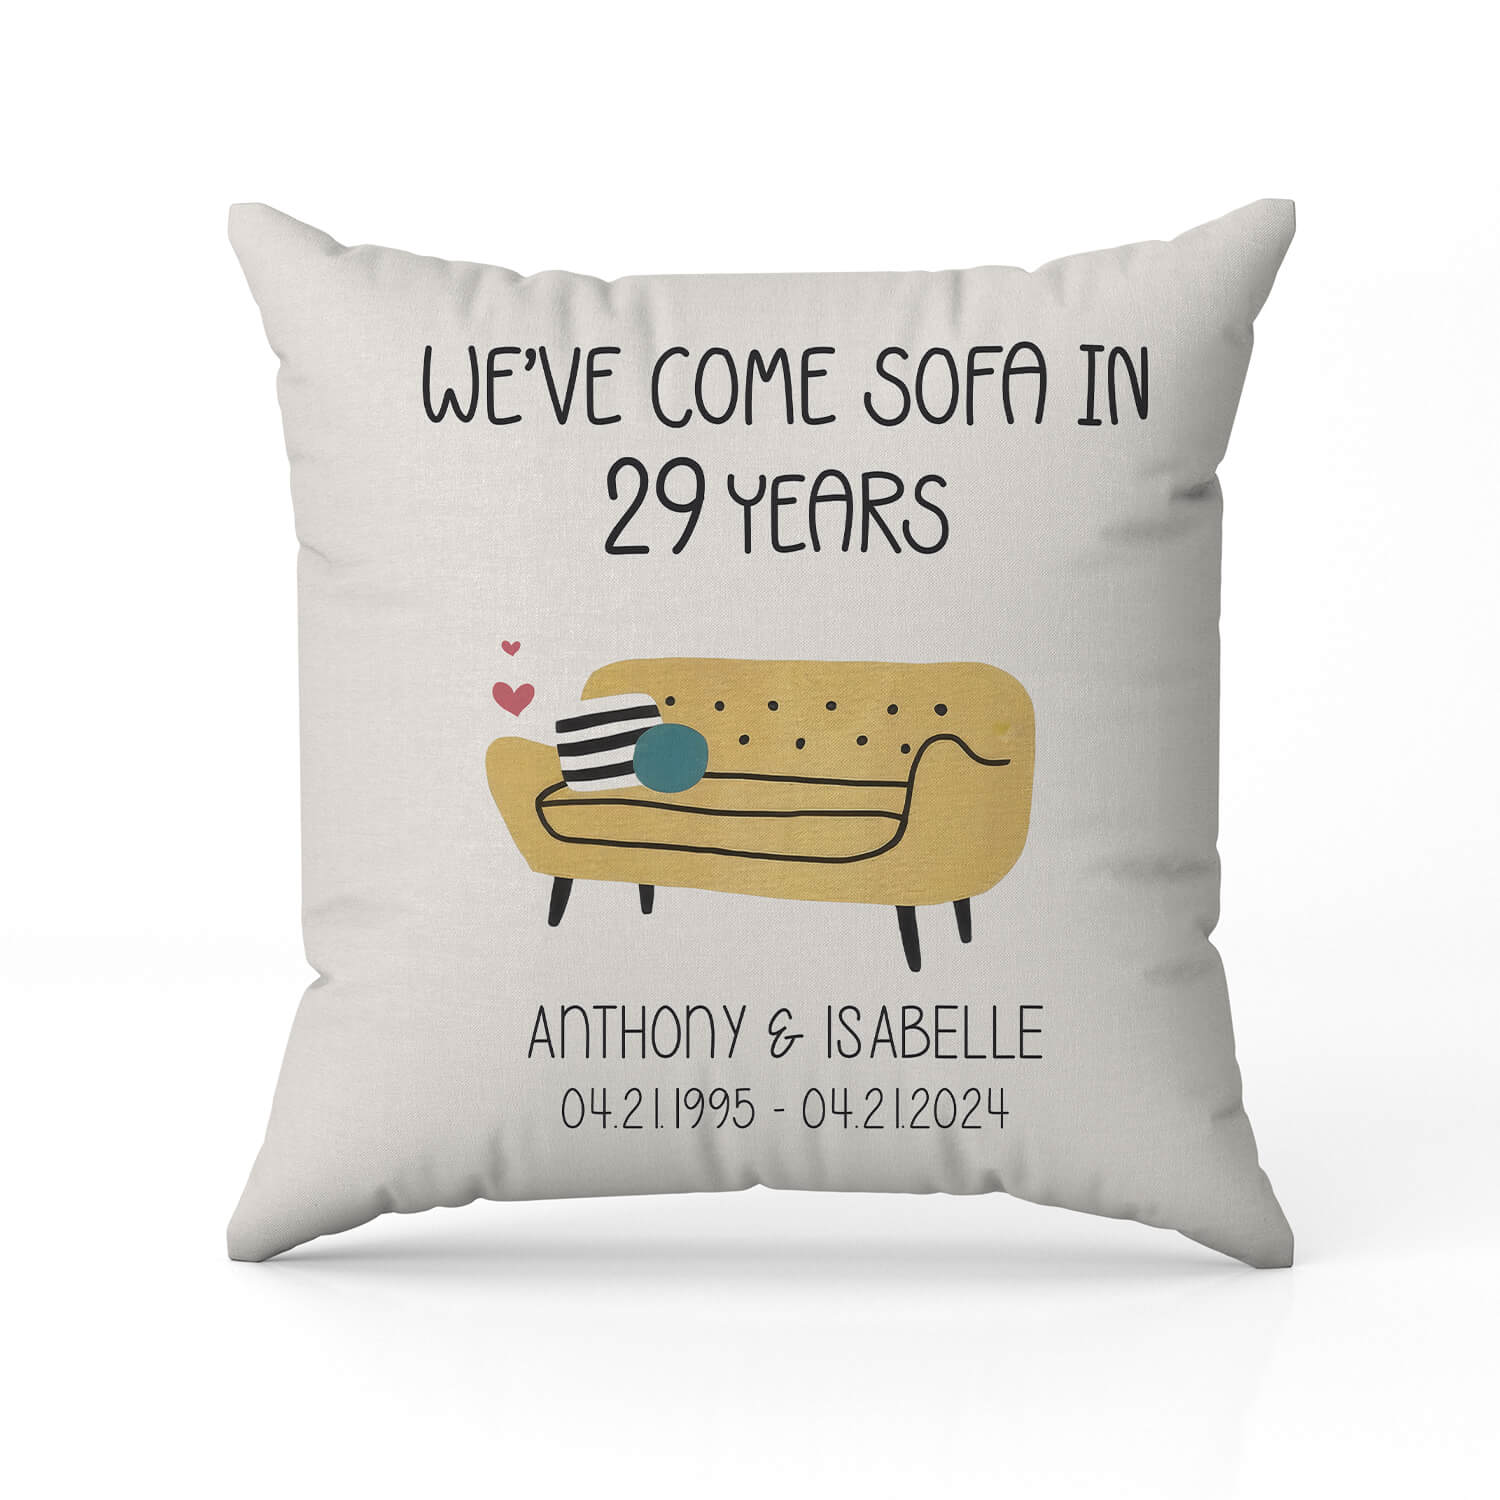 We've Come Sofa In 29 Years - Personalized 29 Year Anniversary gift For Husband or Wife - Custom Pillow - MyMindfulGifts